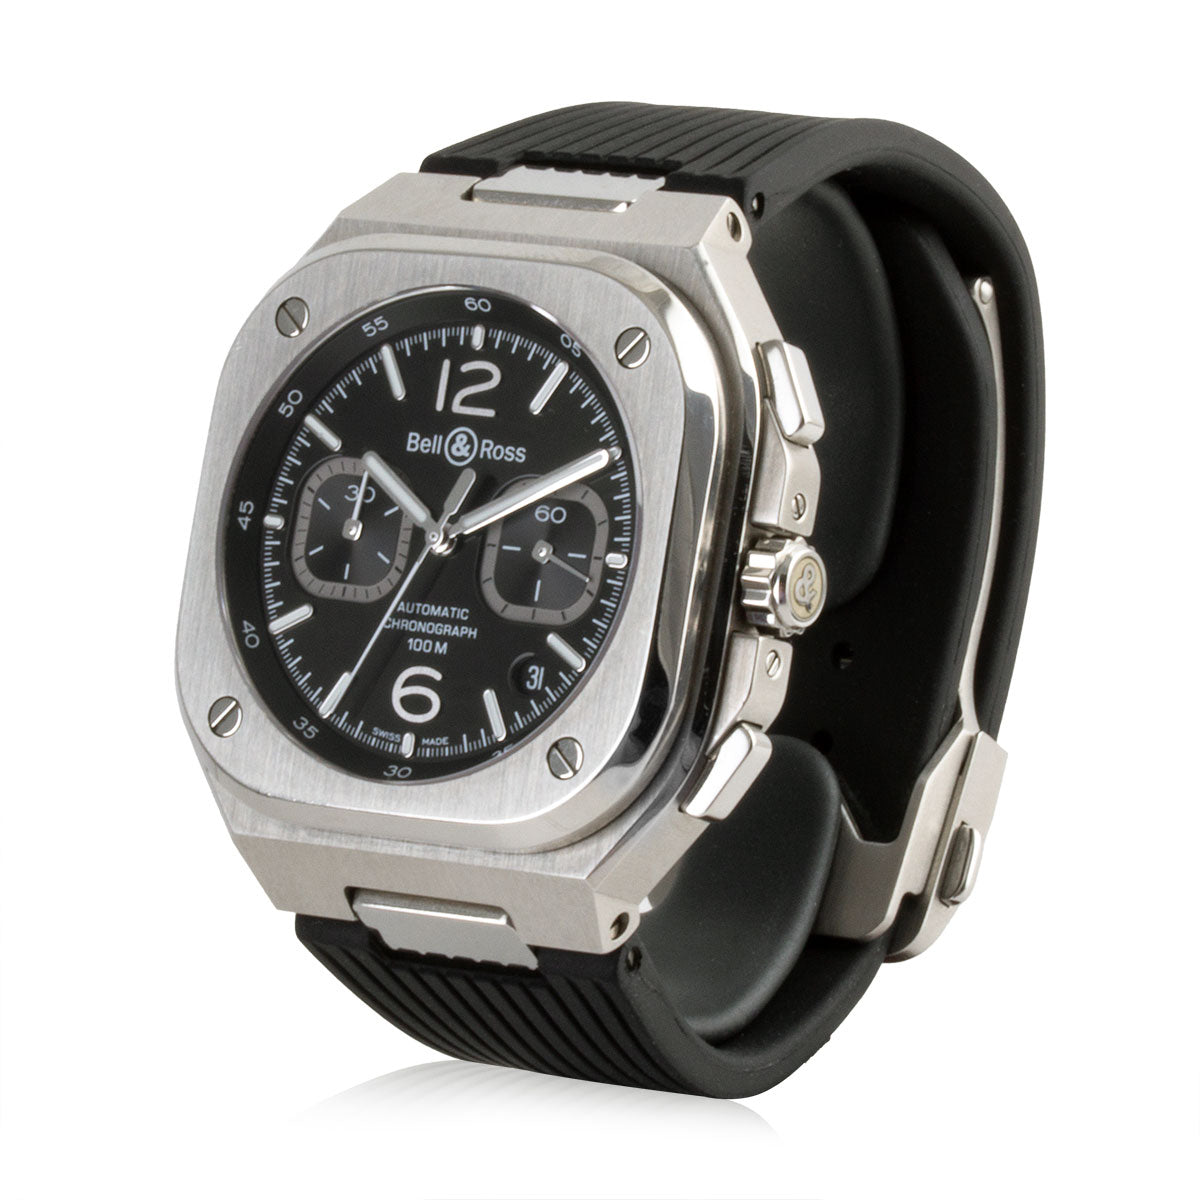 Second-hand watch - Bell & Ross - BR 05 Chronograph - 5000€